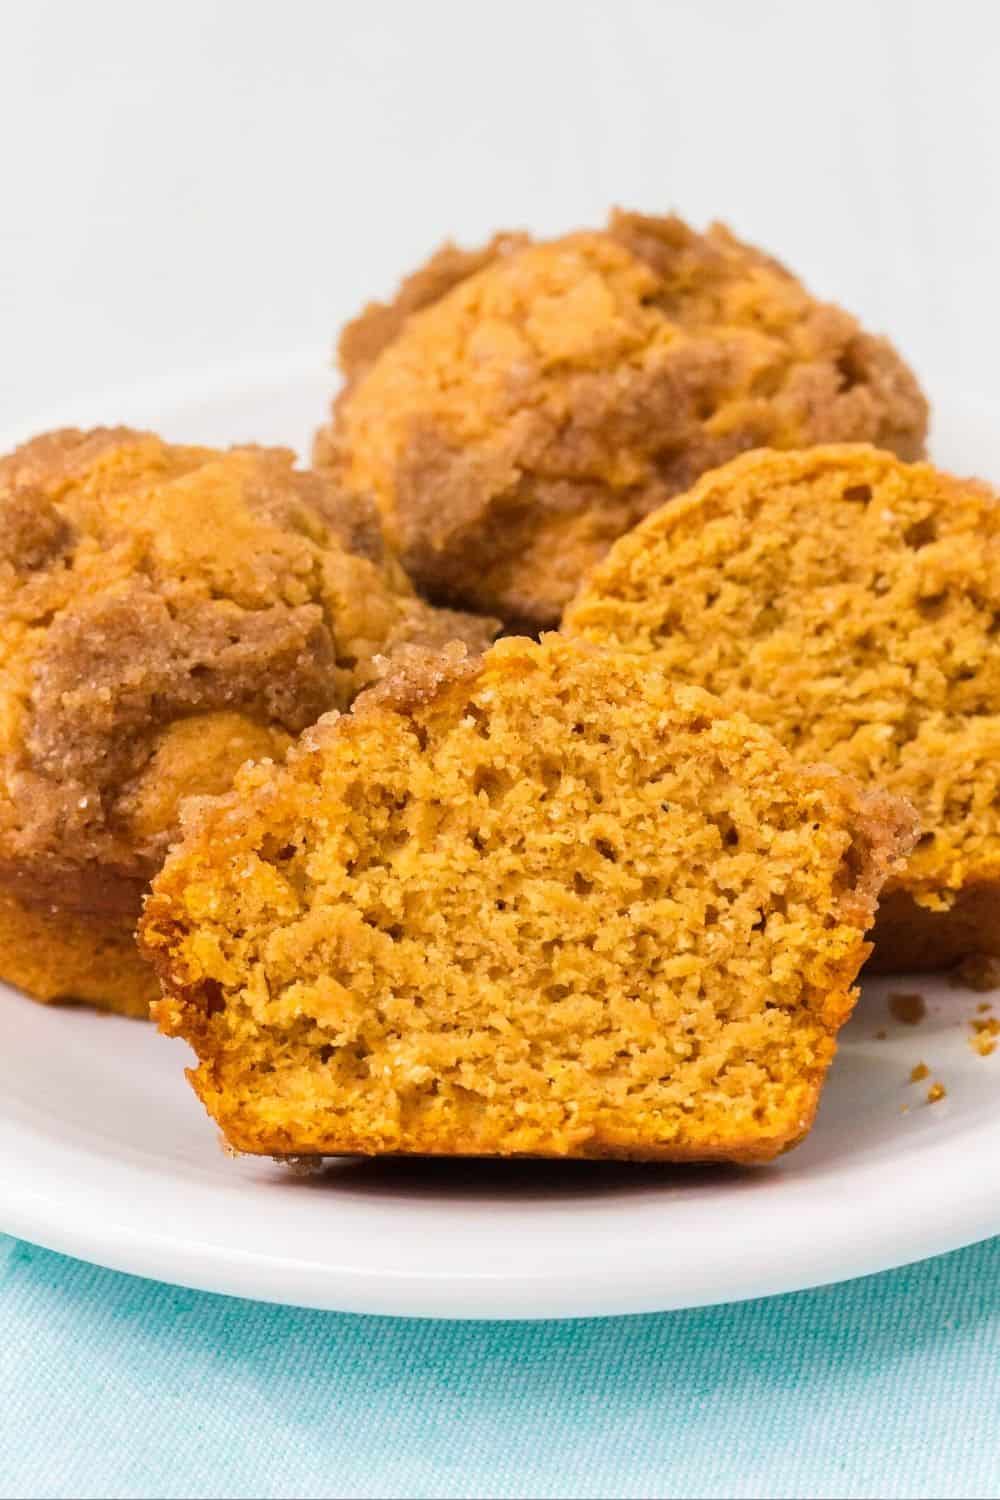 detailed view of a sweet potato muffin made with Bisquick, cut in half to show both the crunchy streusel topping as well as the tender interior.